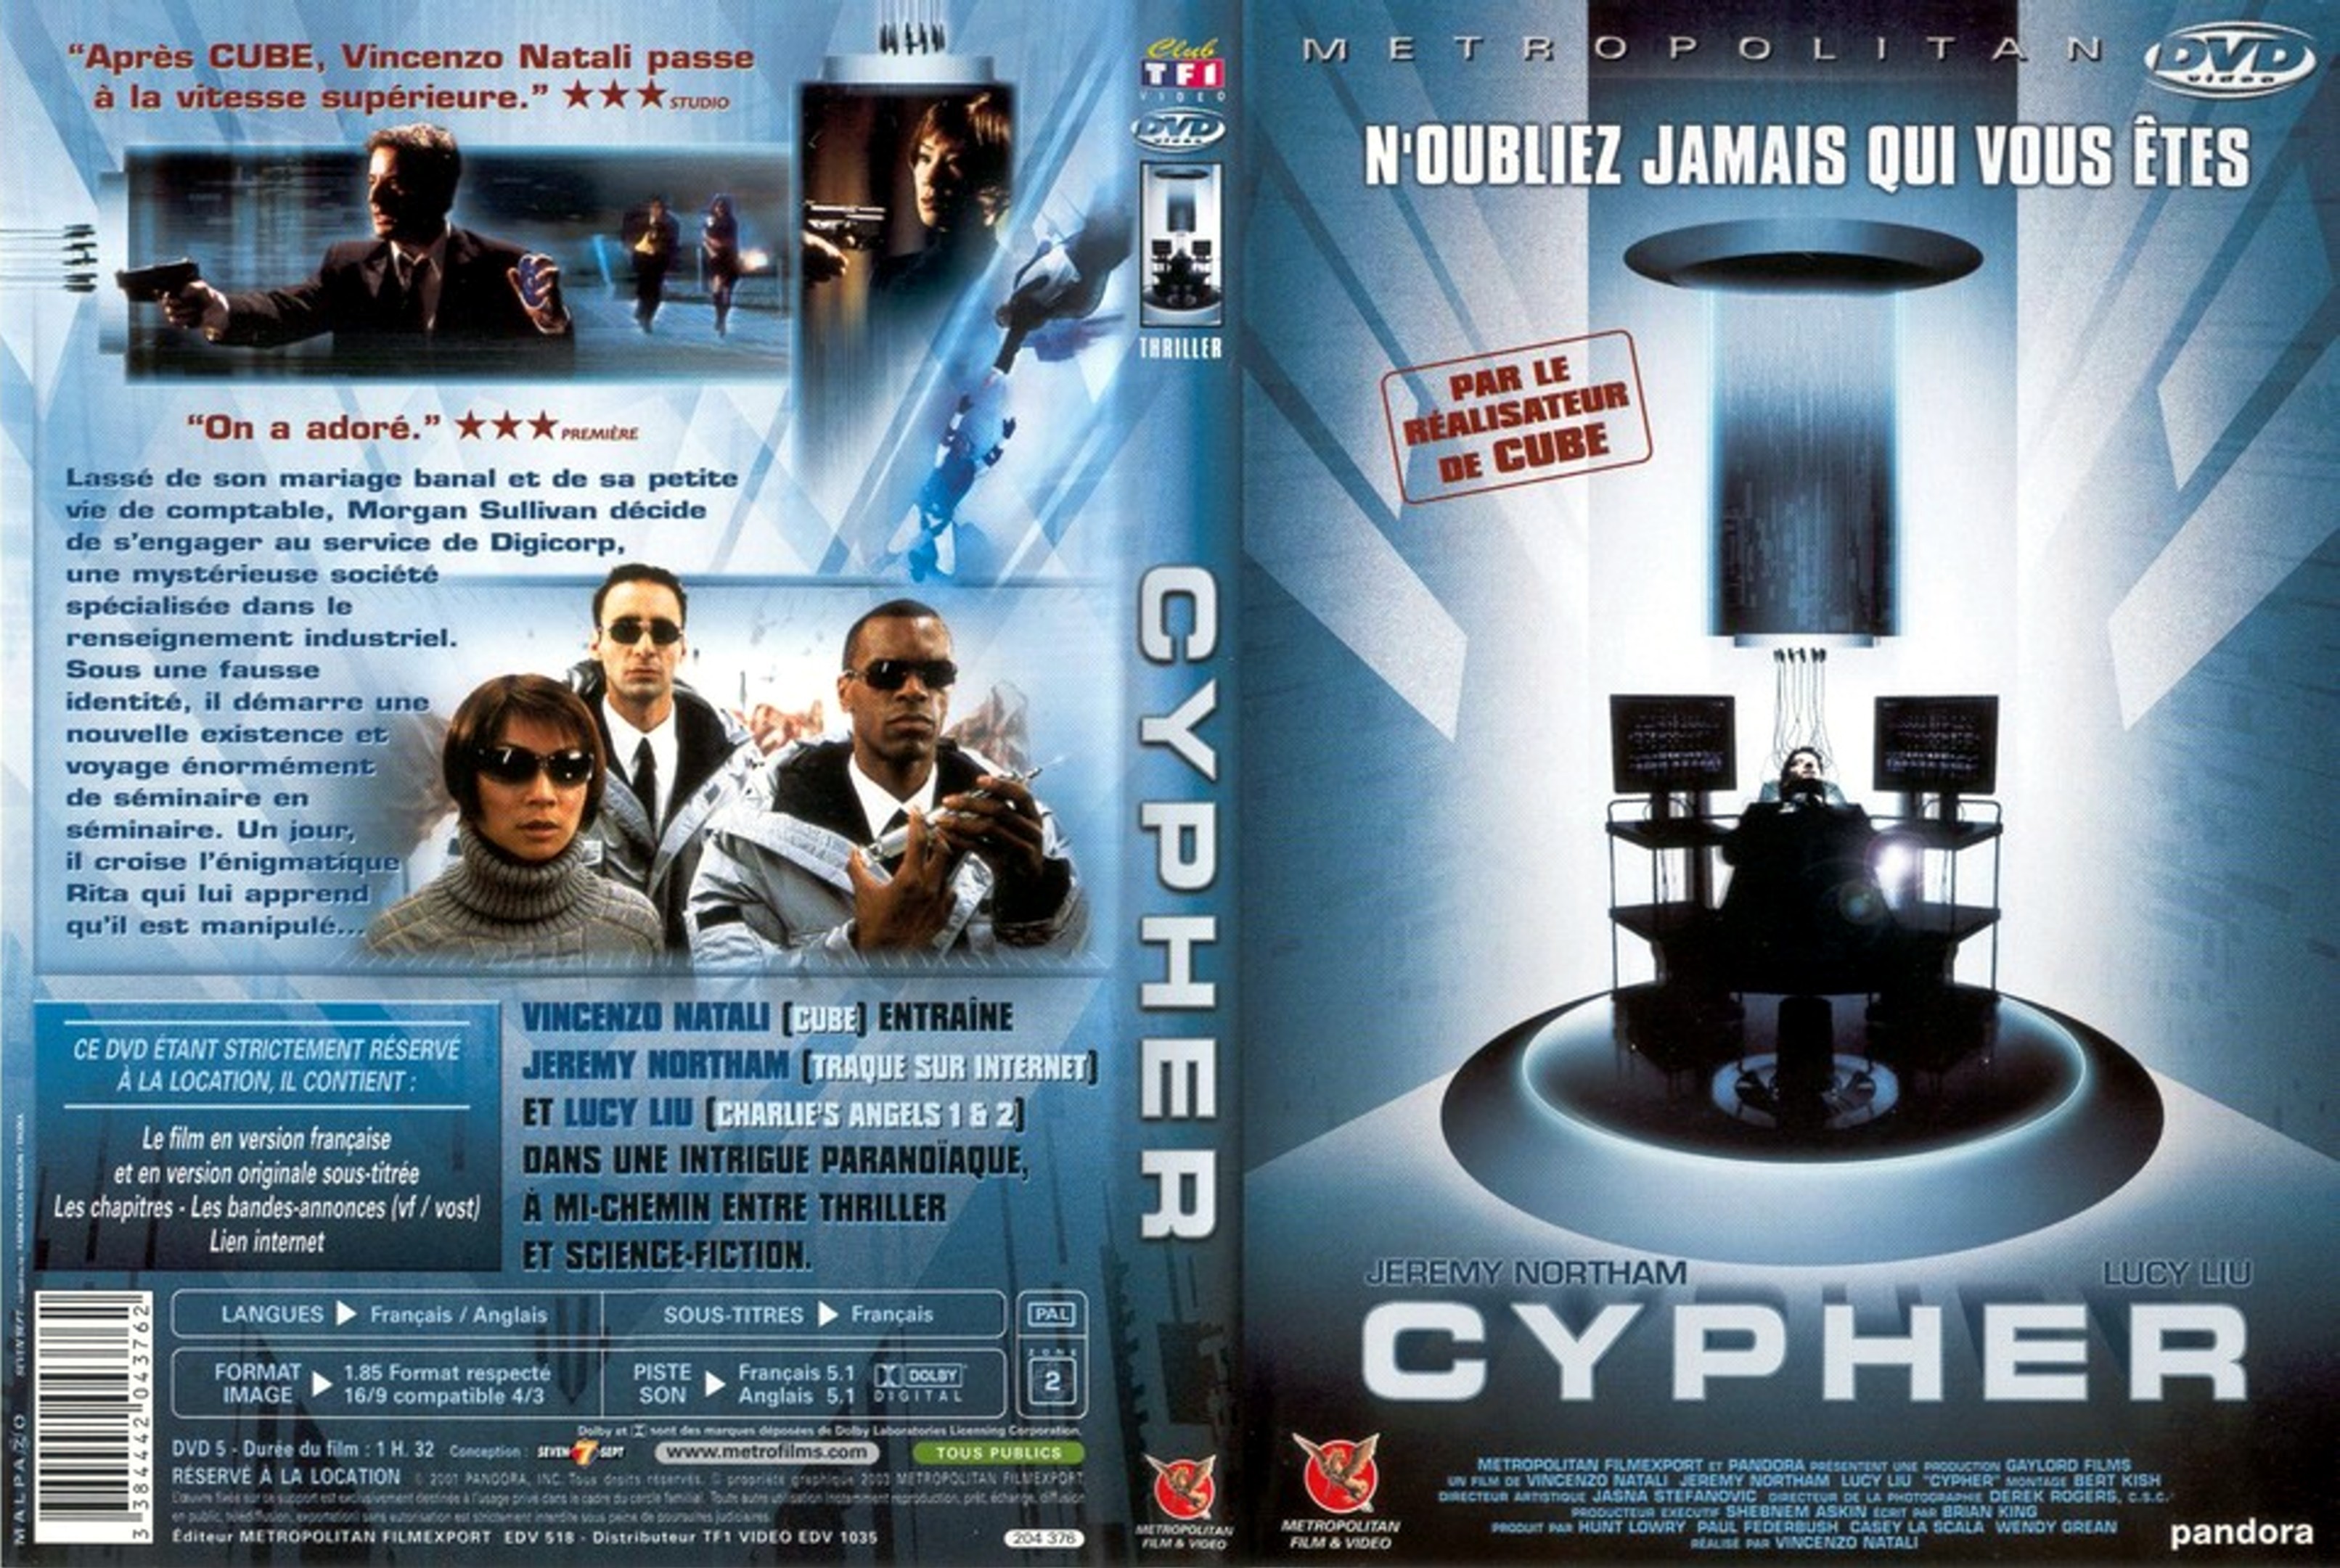 Jaquette DVD Cypher v2